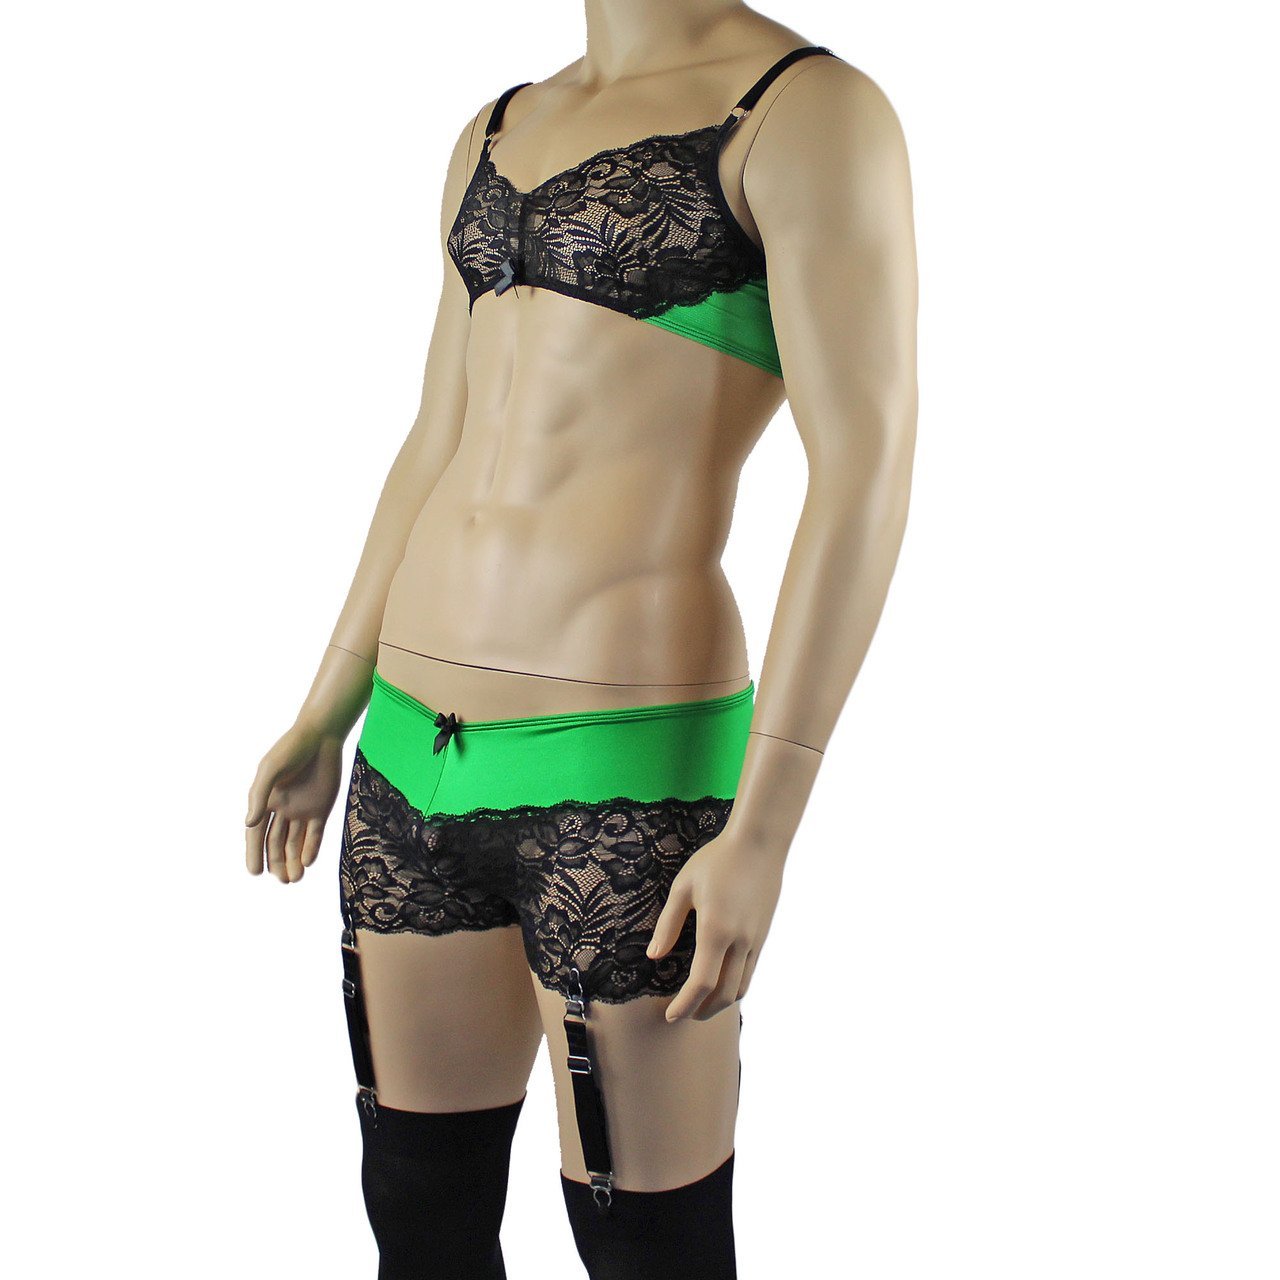 Mens Risque Bra Top, Boxer Briefs with Detachable Garters & Stockings (green and black plus other colours)